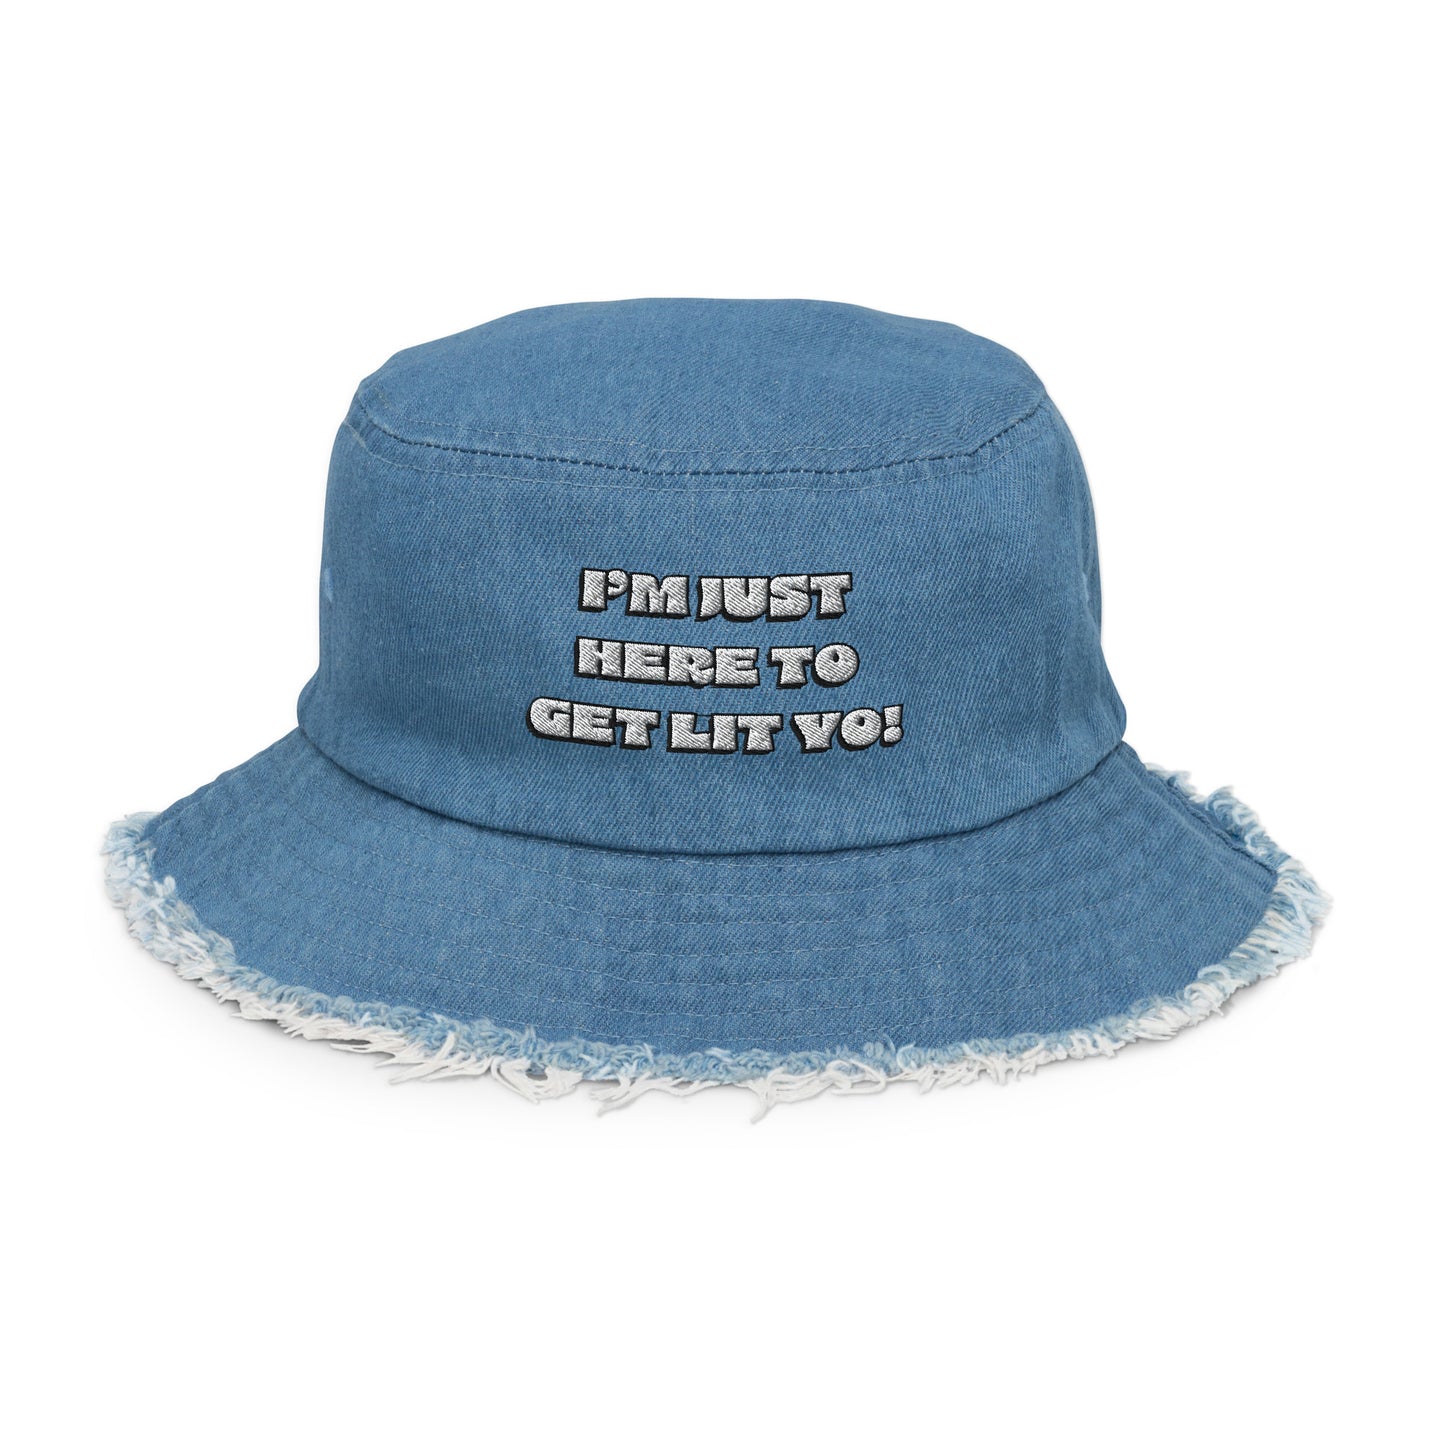 I'm Just Here To Get Lit Yo! Embroidered Bucket Hat